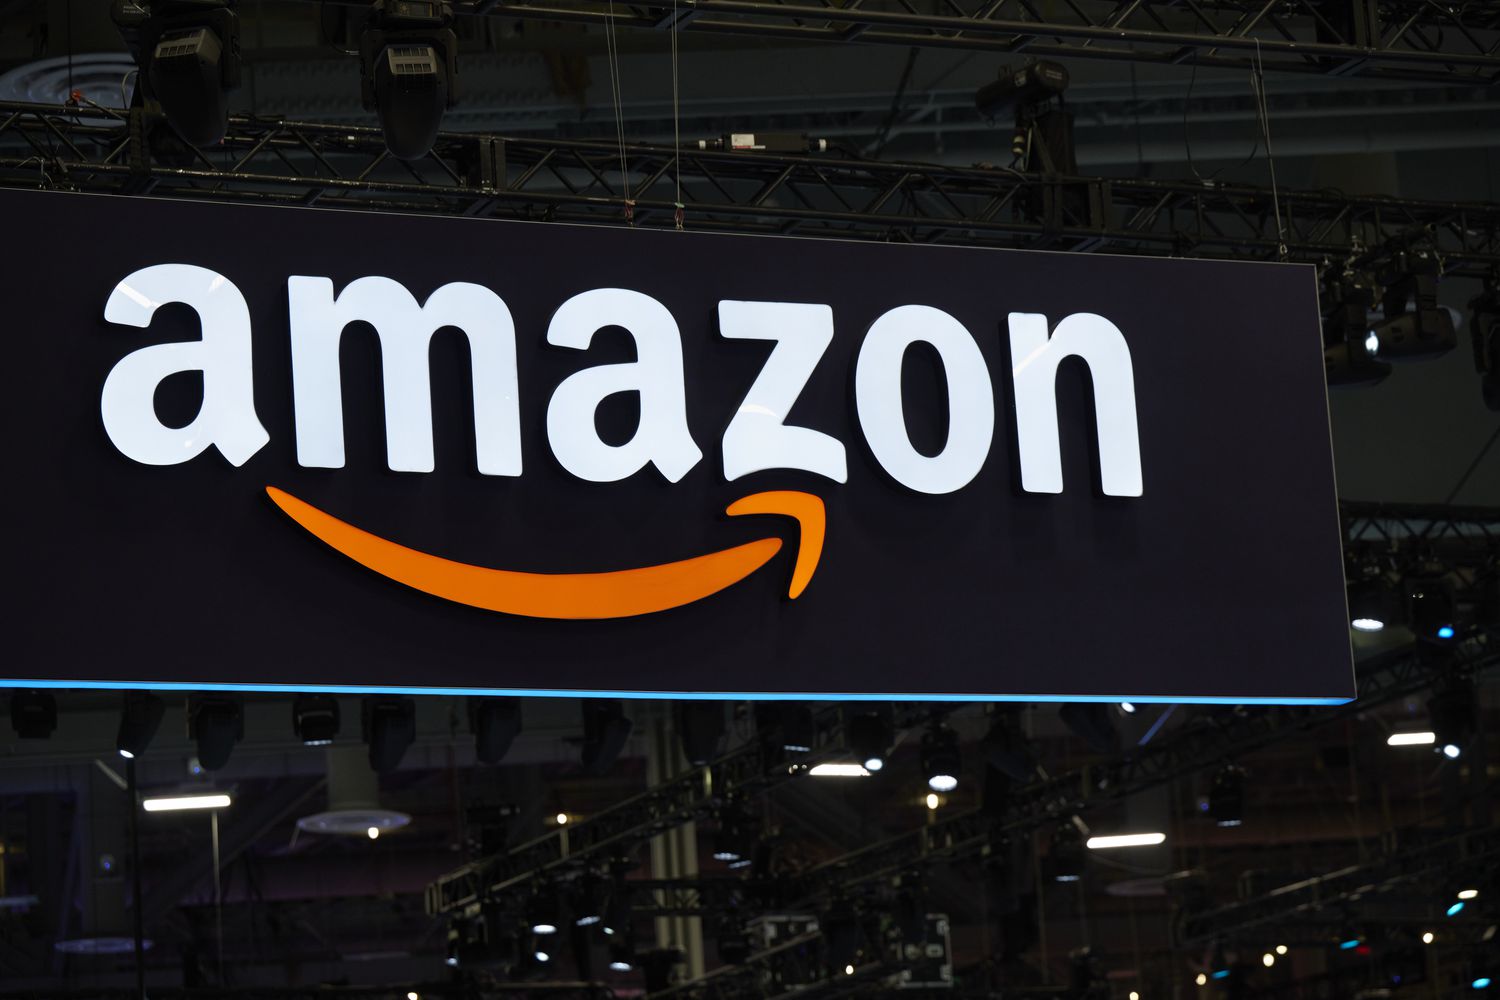 Amazon finalizes its biggest venture capital investment by injecting $4 billion into the AI startup Anthropic